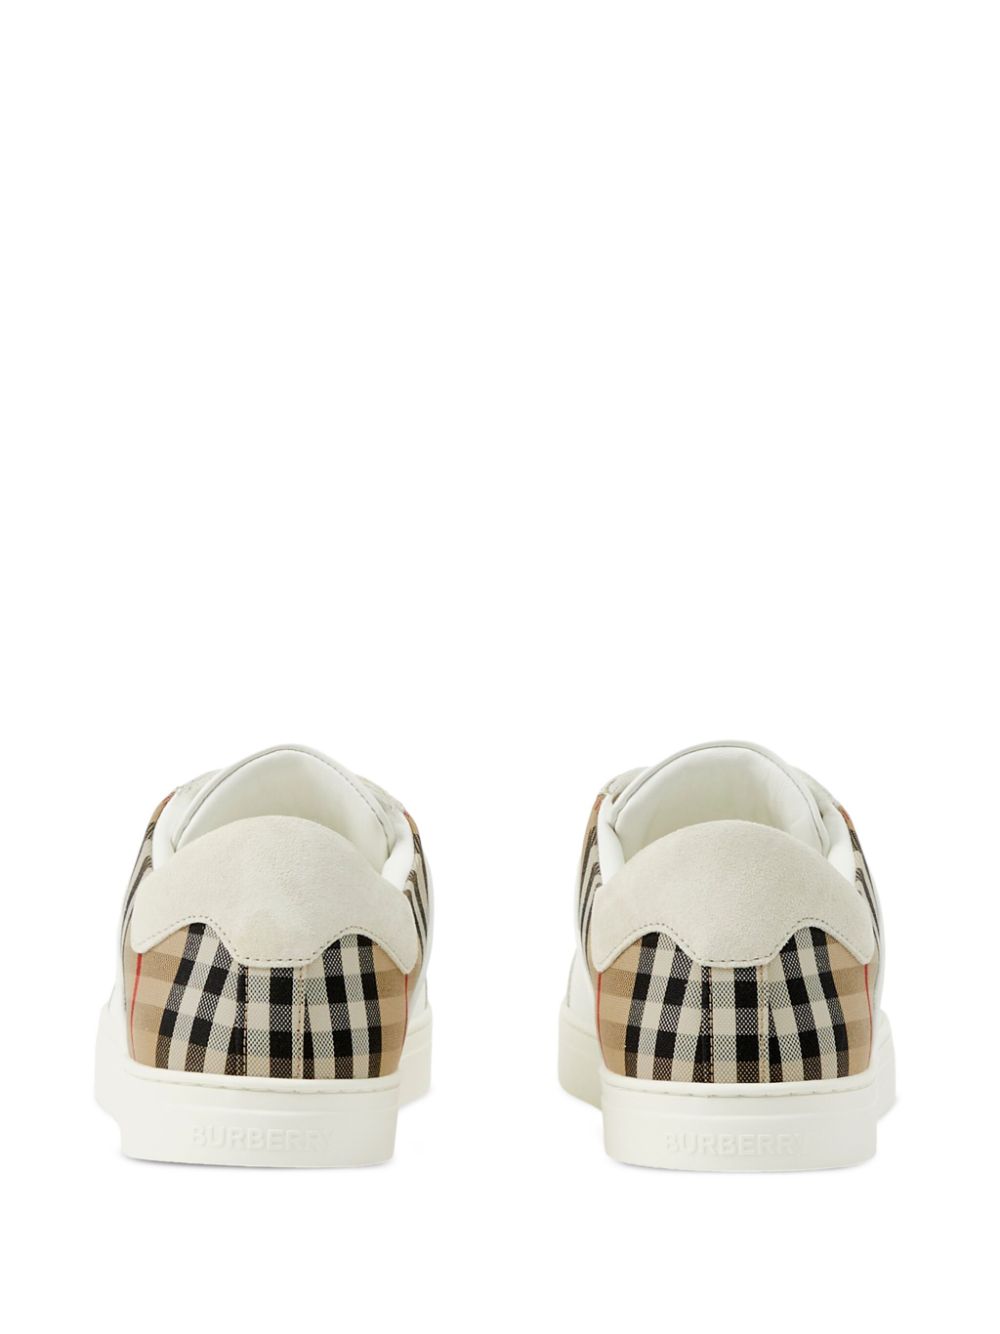 Burberry Sneakers White